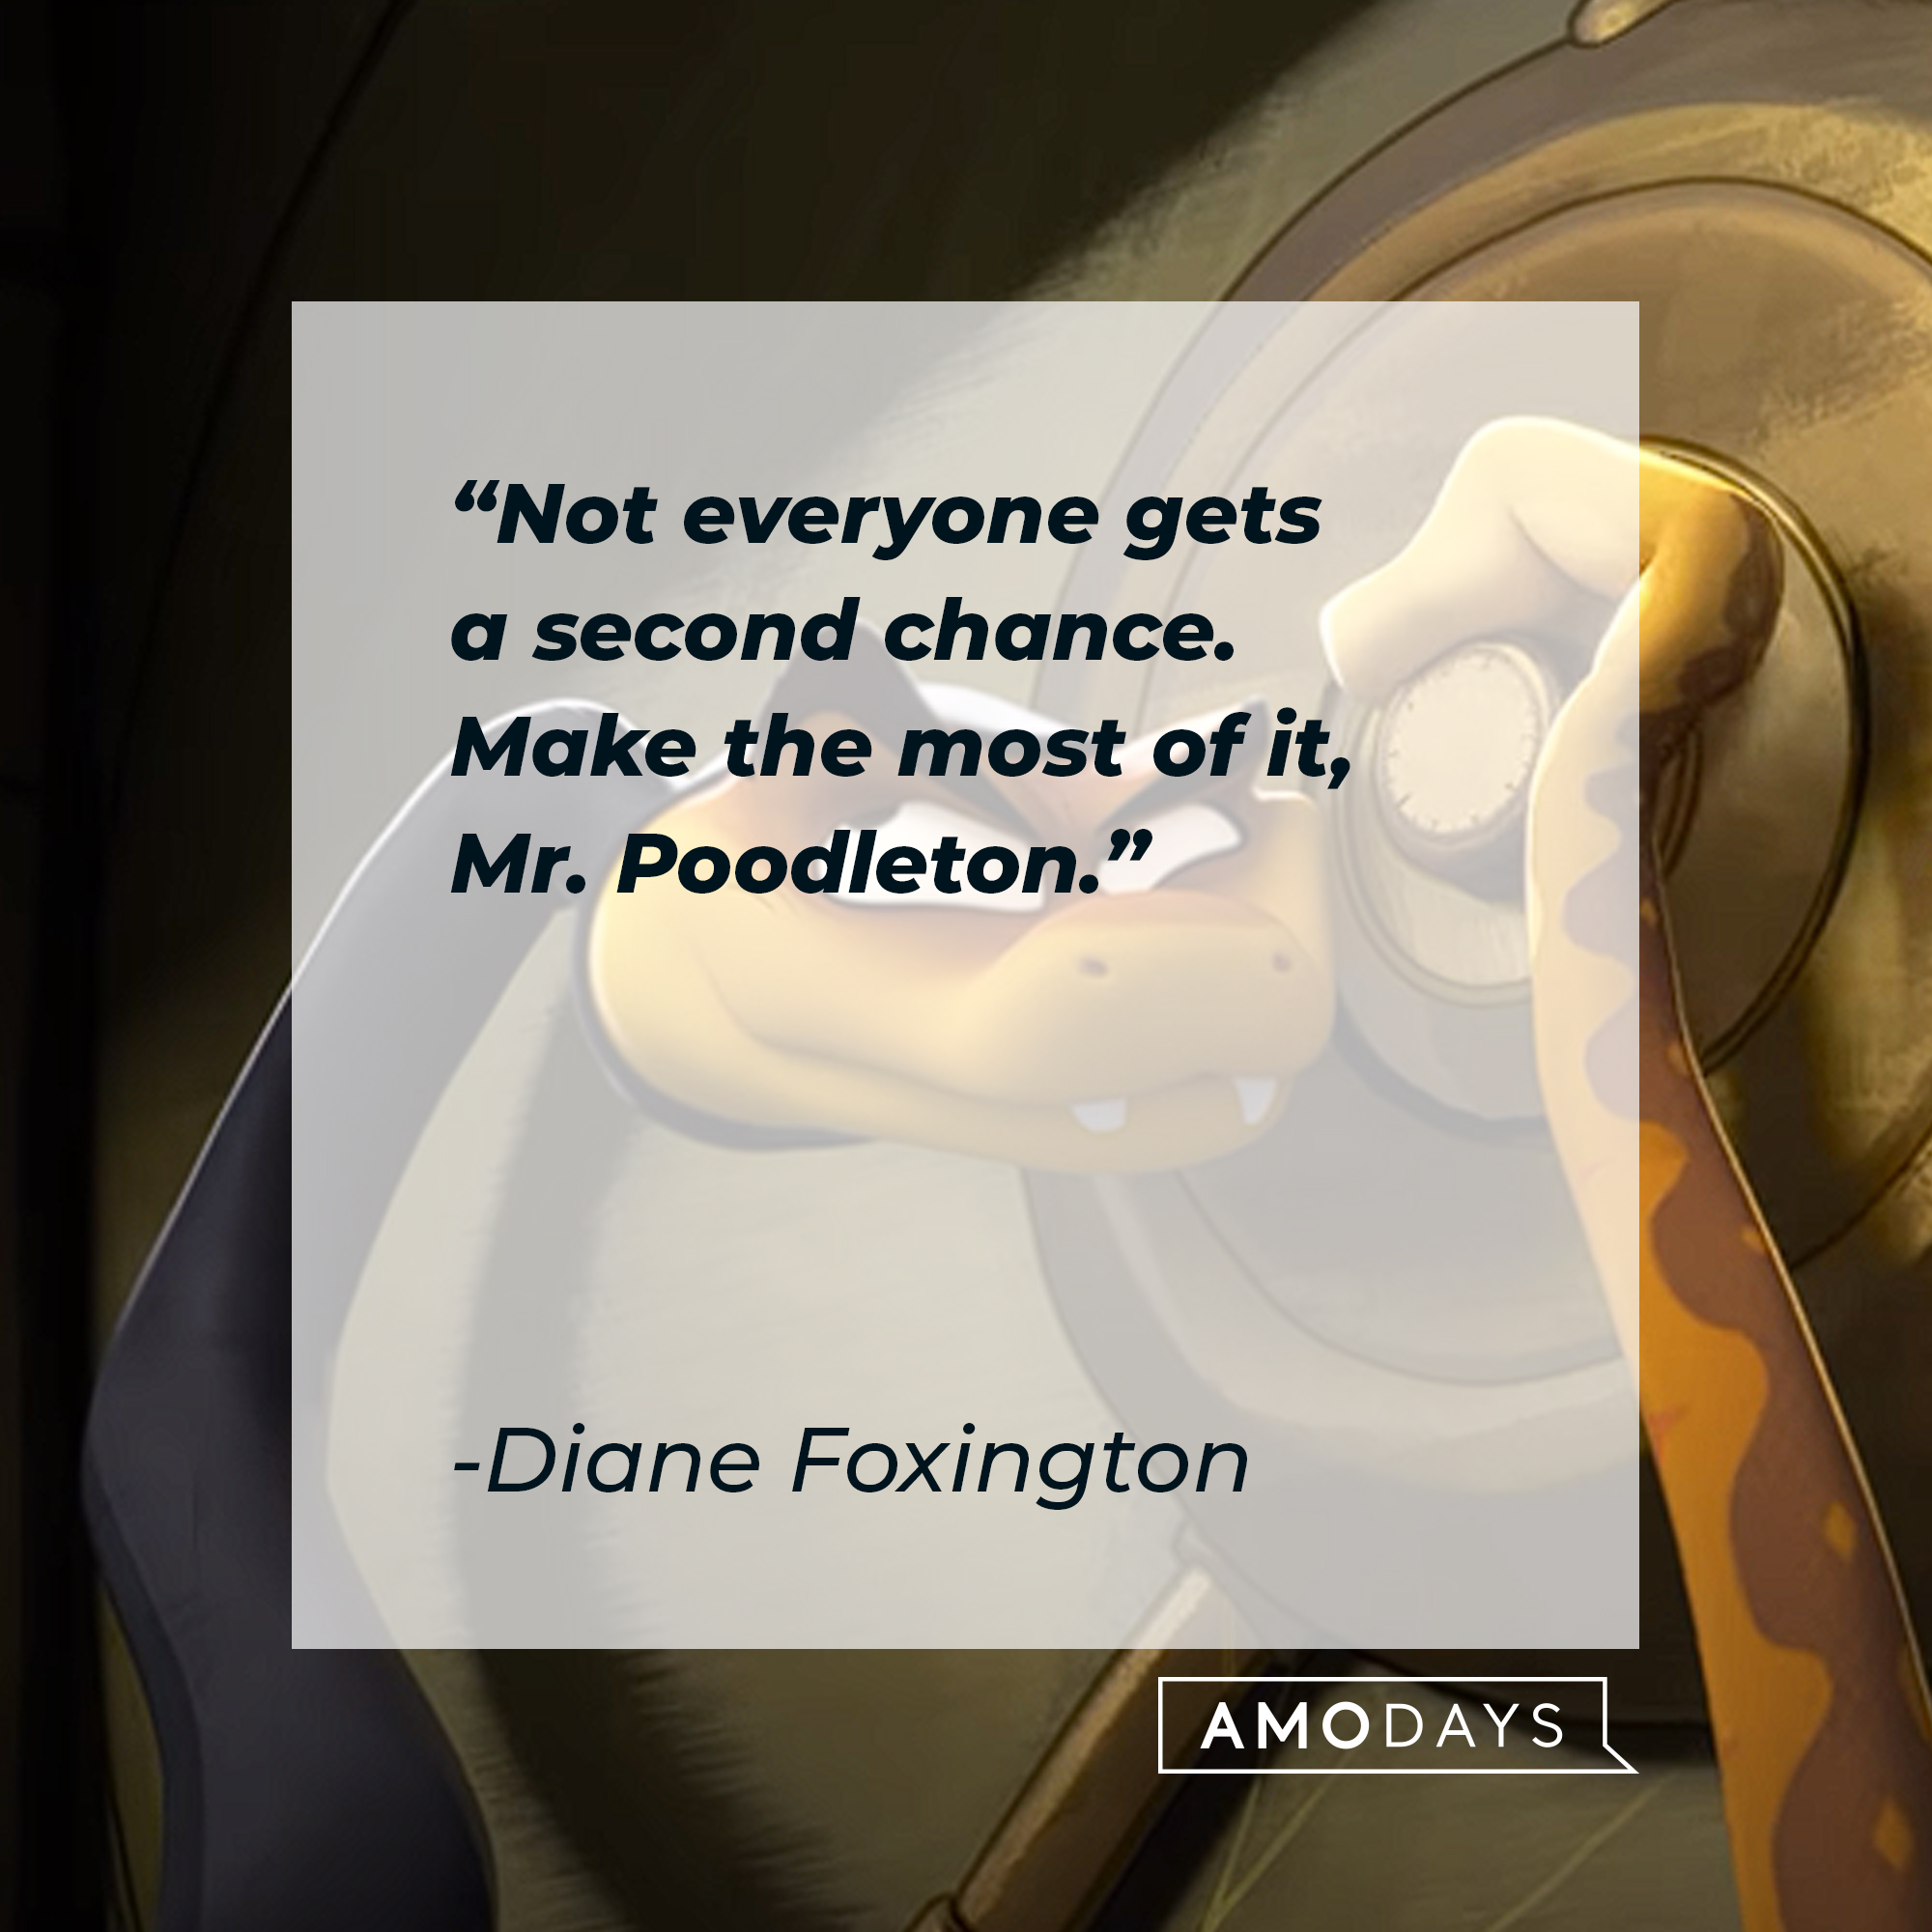 Diane Foxington's quote: "Not everyone gets a second chance. Make the most of it, Mr. Poodleton." | Source: youtube.com/UniversalPictures